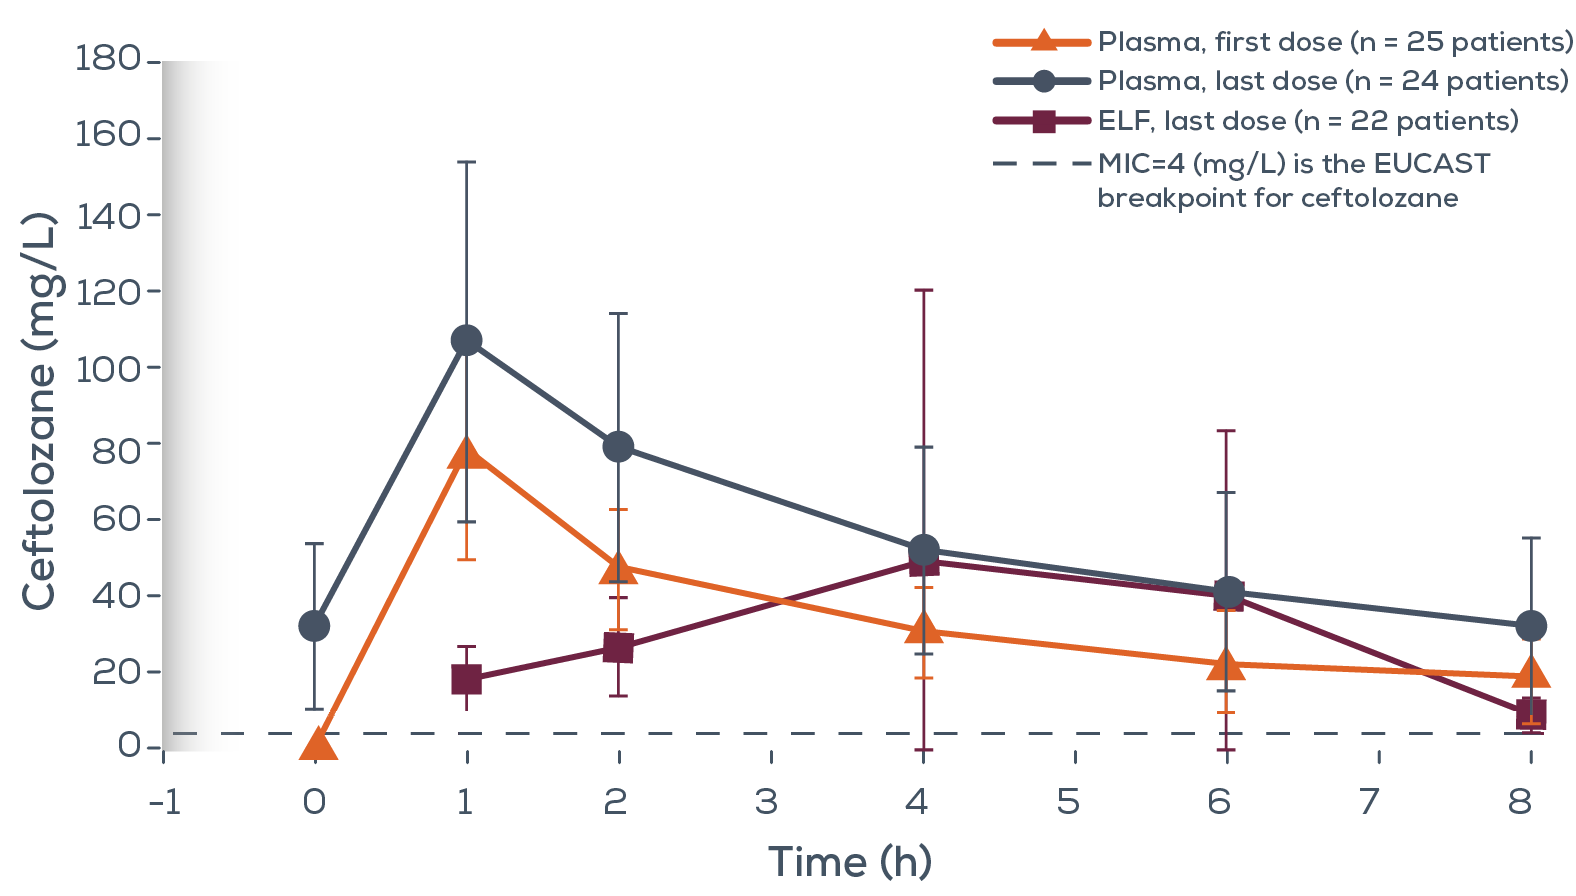 Ceftolozane levels increase with Plasma first and last dose in the first hour then decrease up to the eight hour. Ceftolozane levels increase with ELF last dose from the first to fourth hour before decreasing